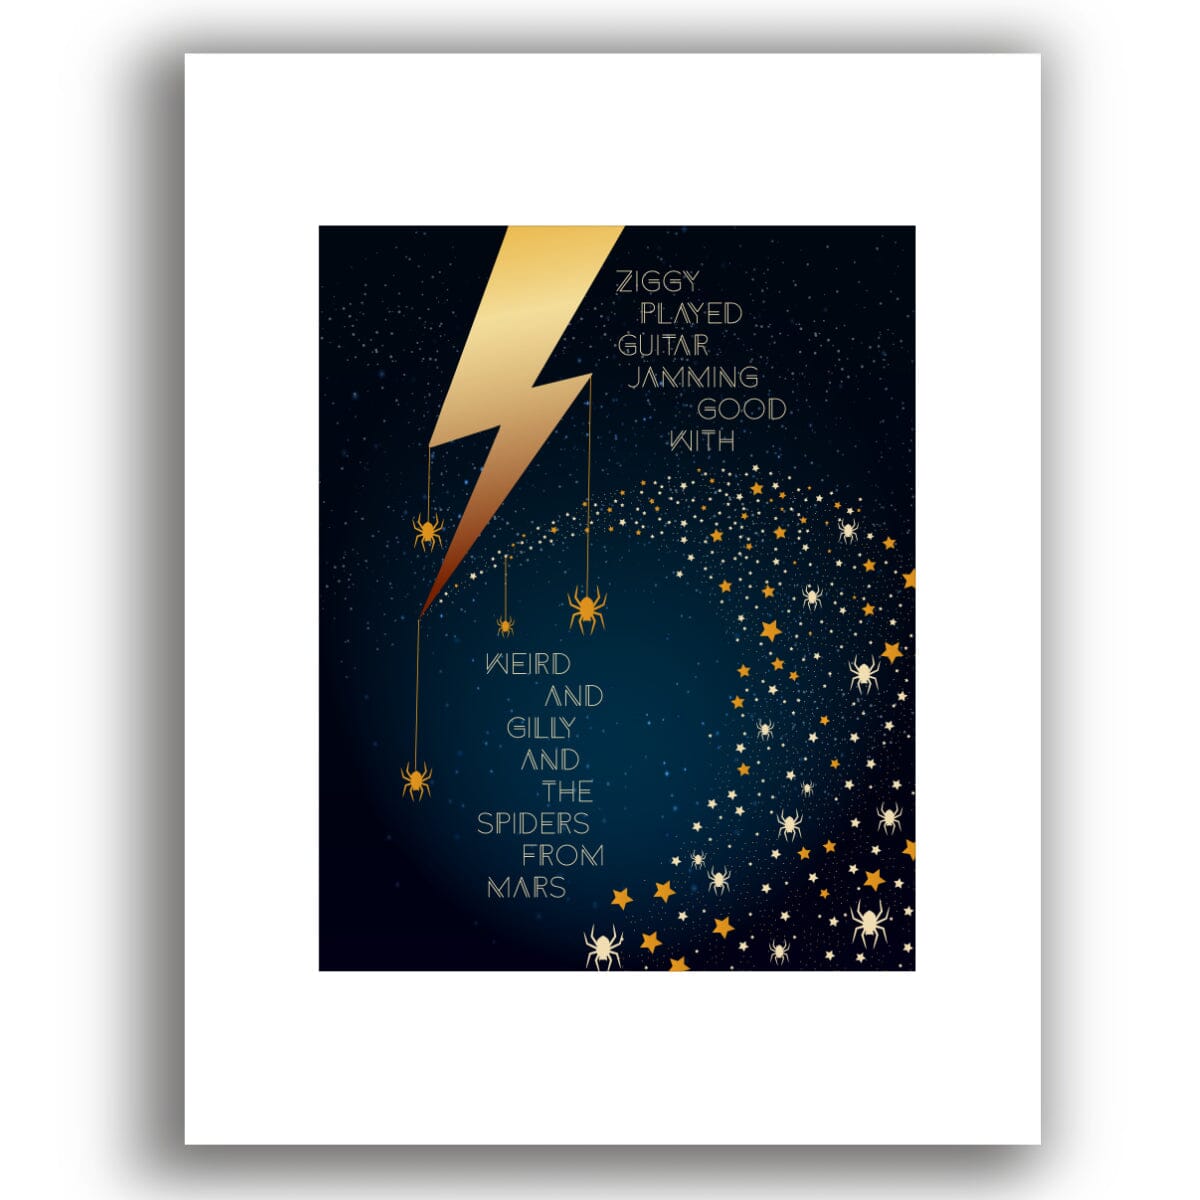 Ziggy Stardust by David Bowie - Song Lyric Visual Artwork Song Lyrics Art Song Lyrics Art 8x10 White Matted Print 